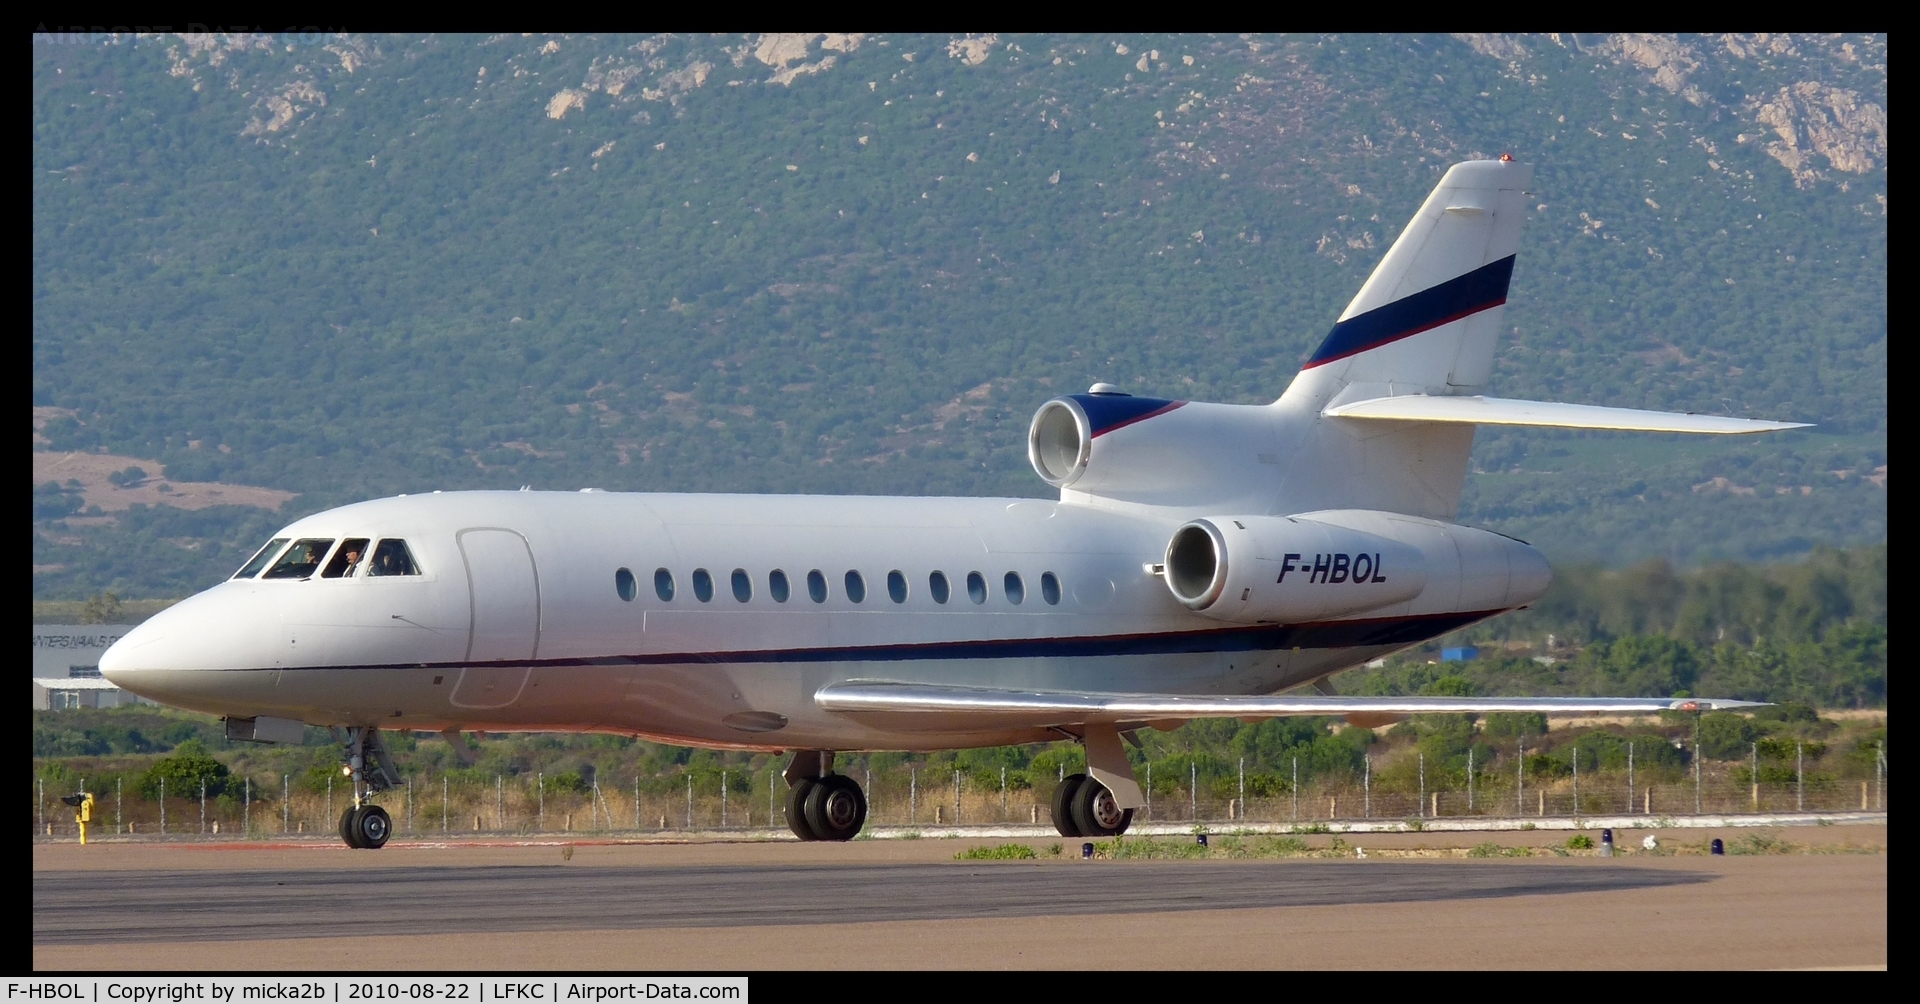 F-HBOL, 2002 Dassault Falcon 900EX C/N 107, Arrival after landing in 18.